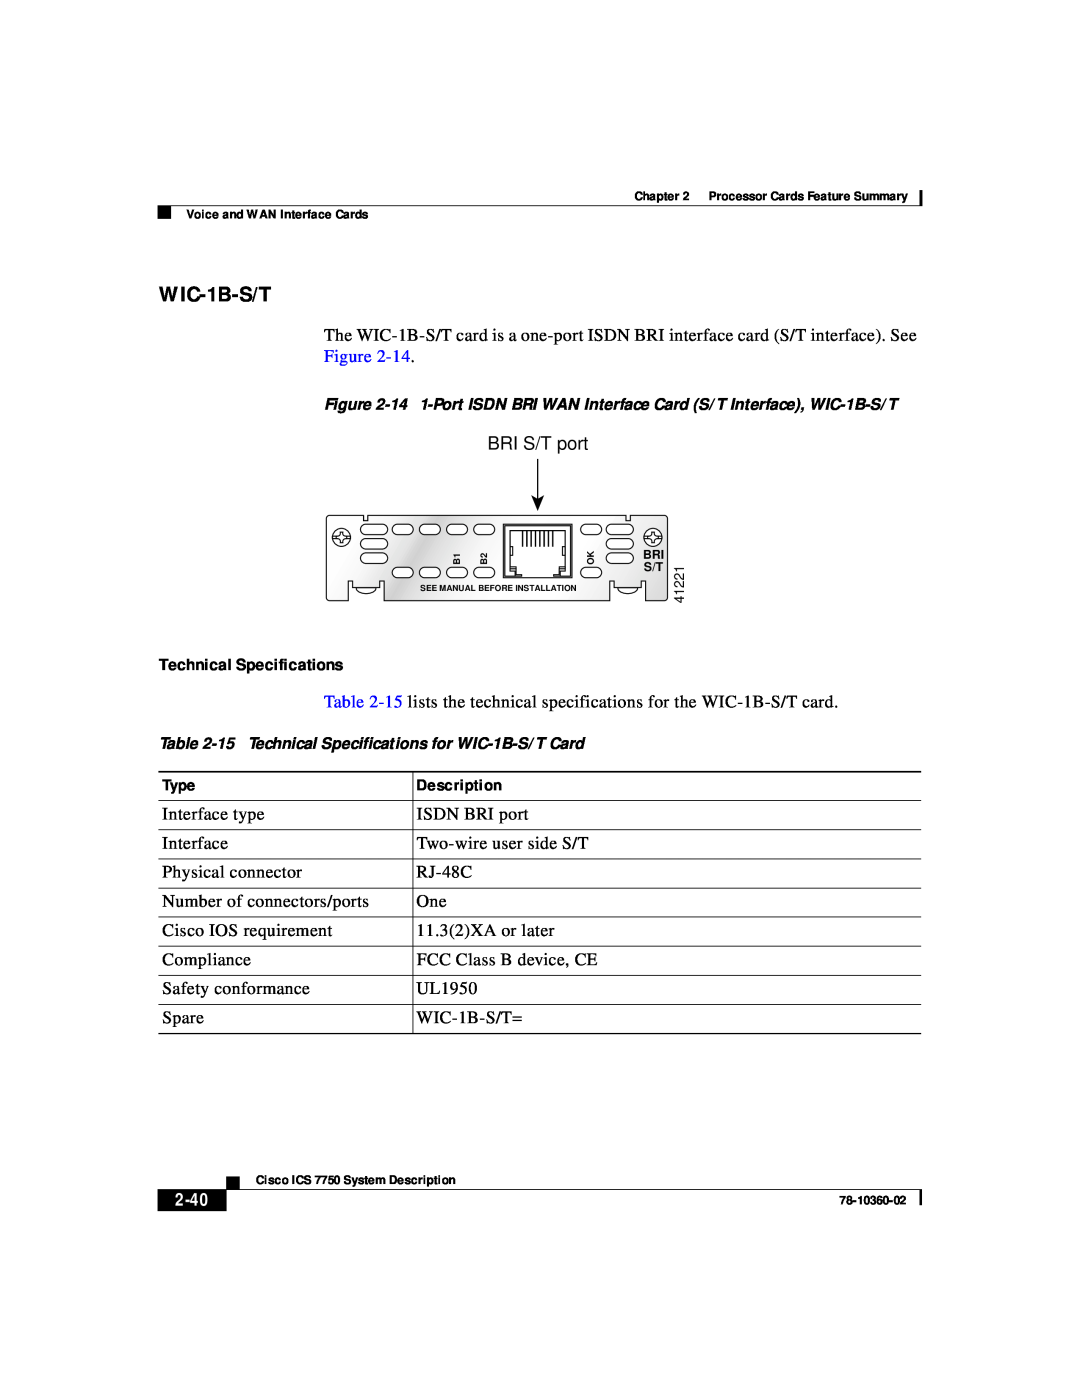 Cisco Systems ICS-7750 manual WIC-1B-S/T, BRI S/T port, Technical Specifications, 2-40 